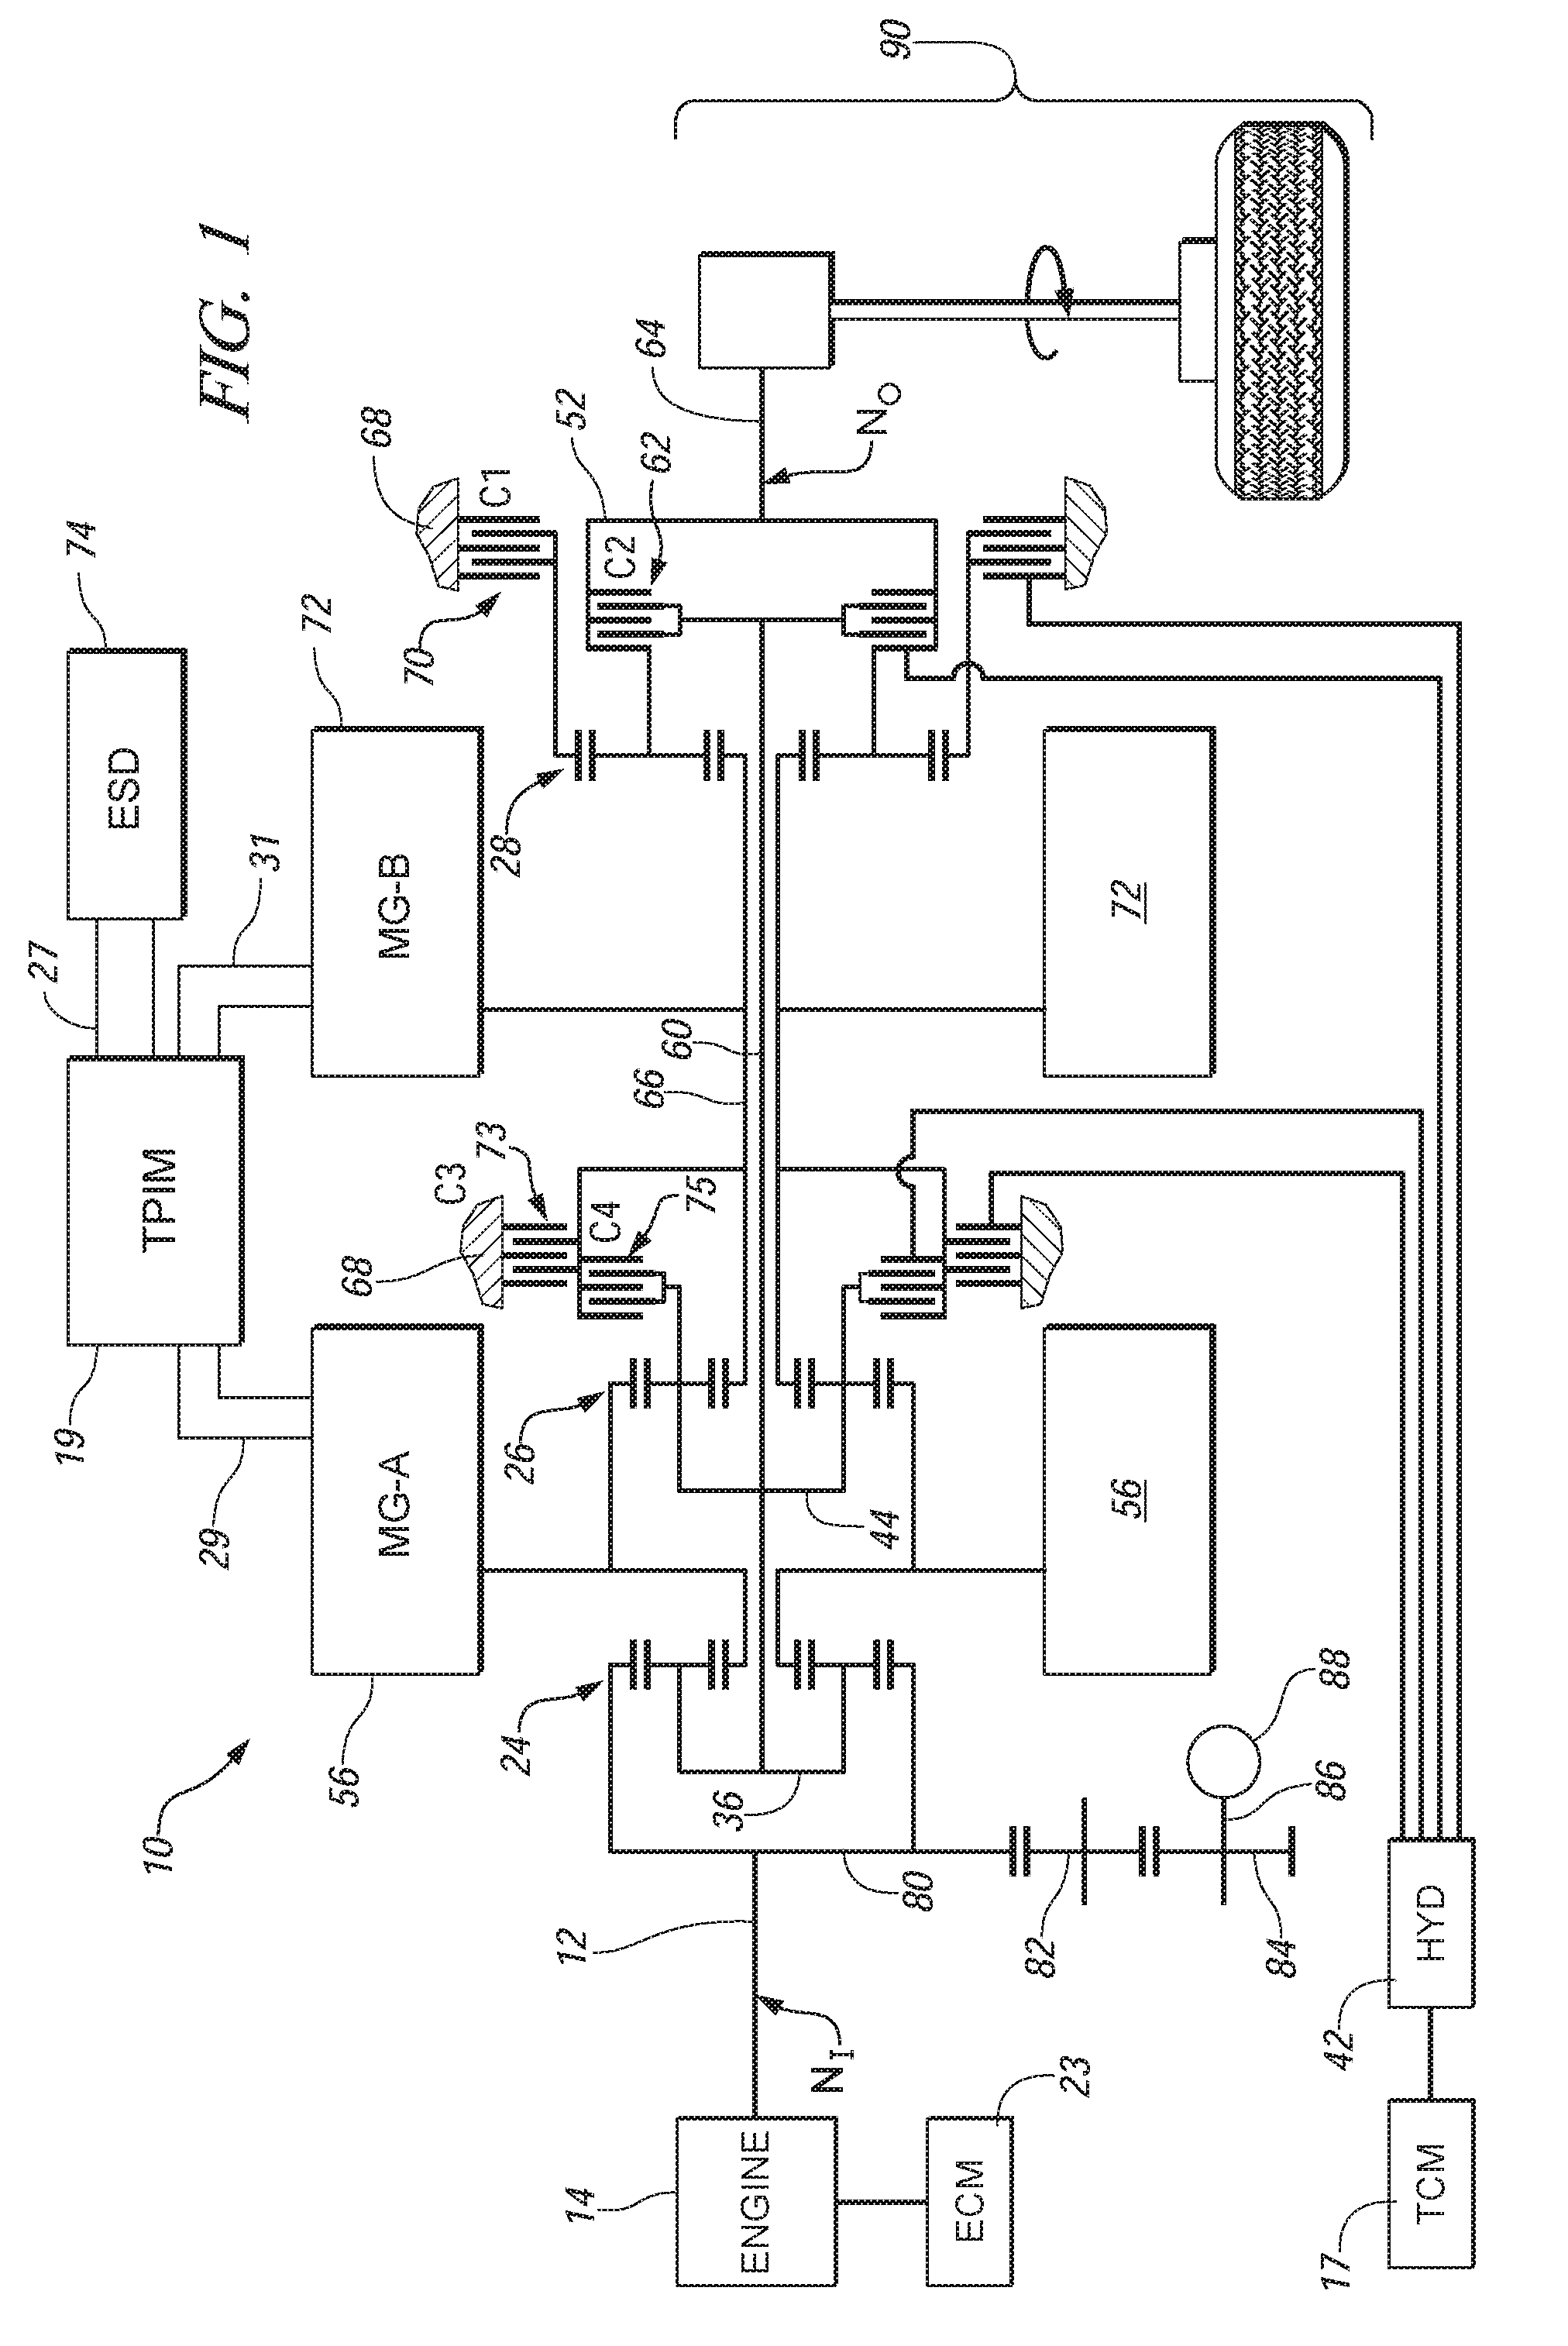 Method and apparatus to control operation of an electro-mechanical transmission